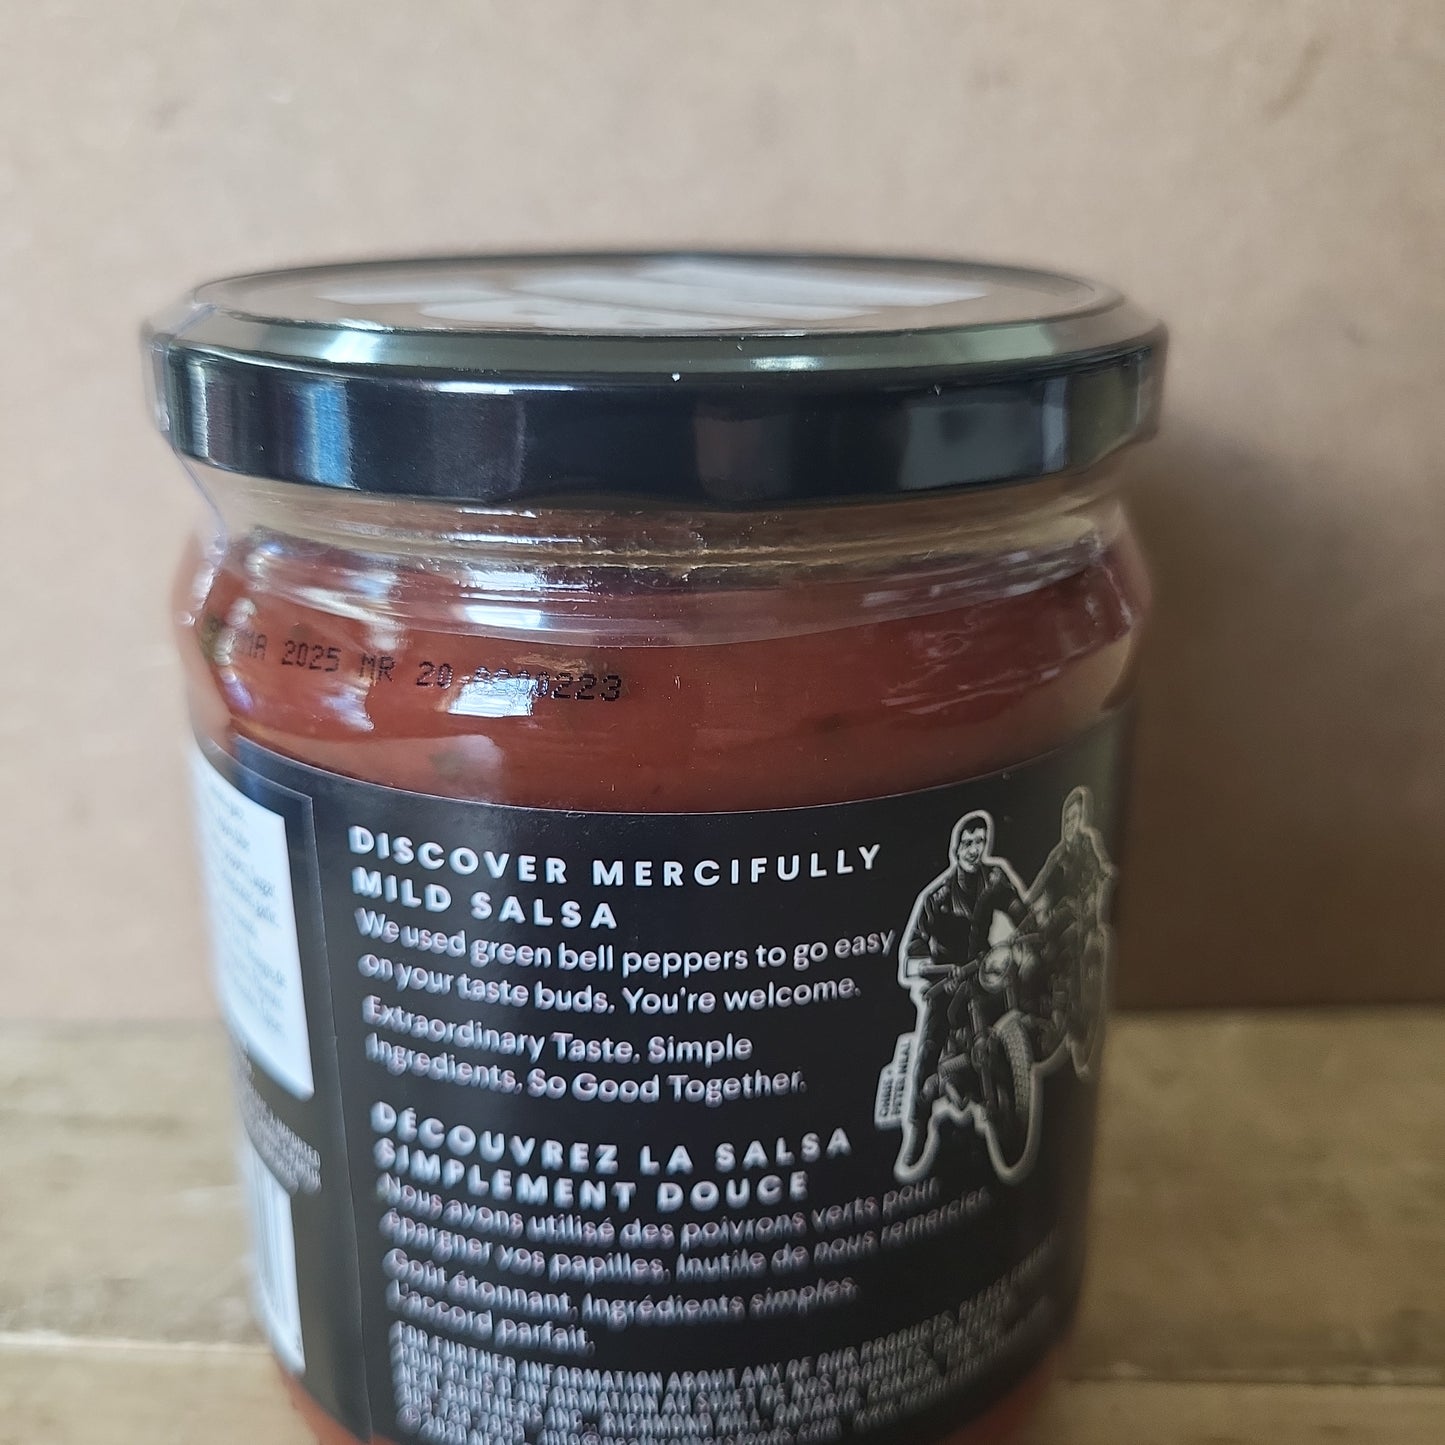 Neal Brothers Mercifully Mild Salsa